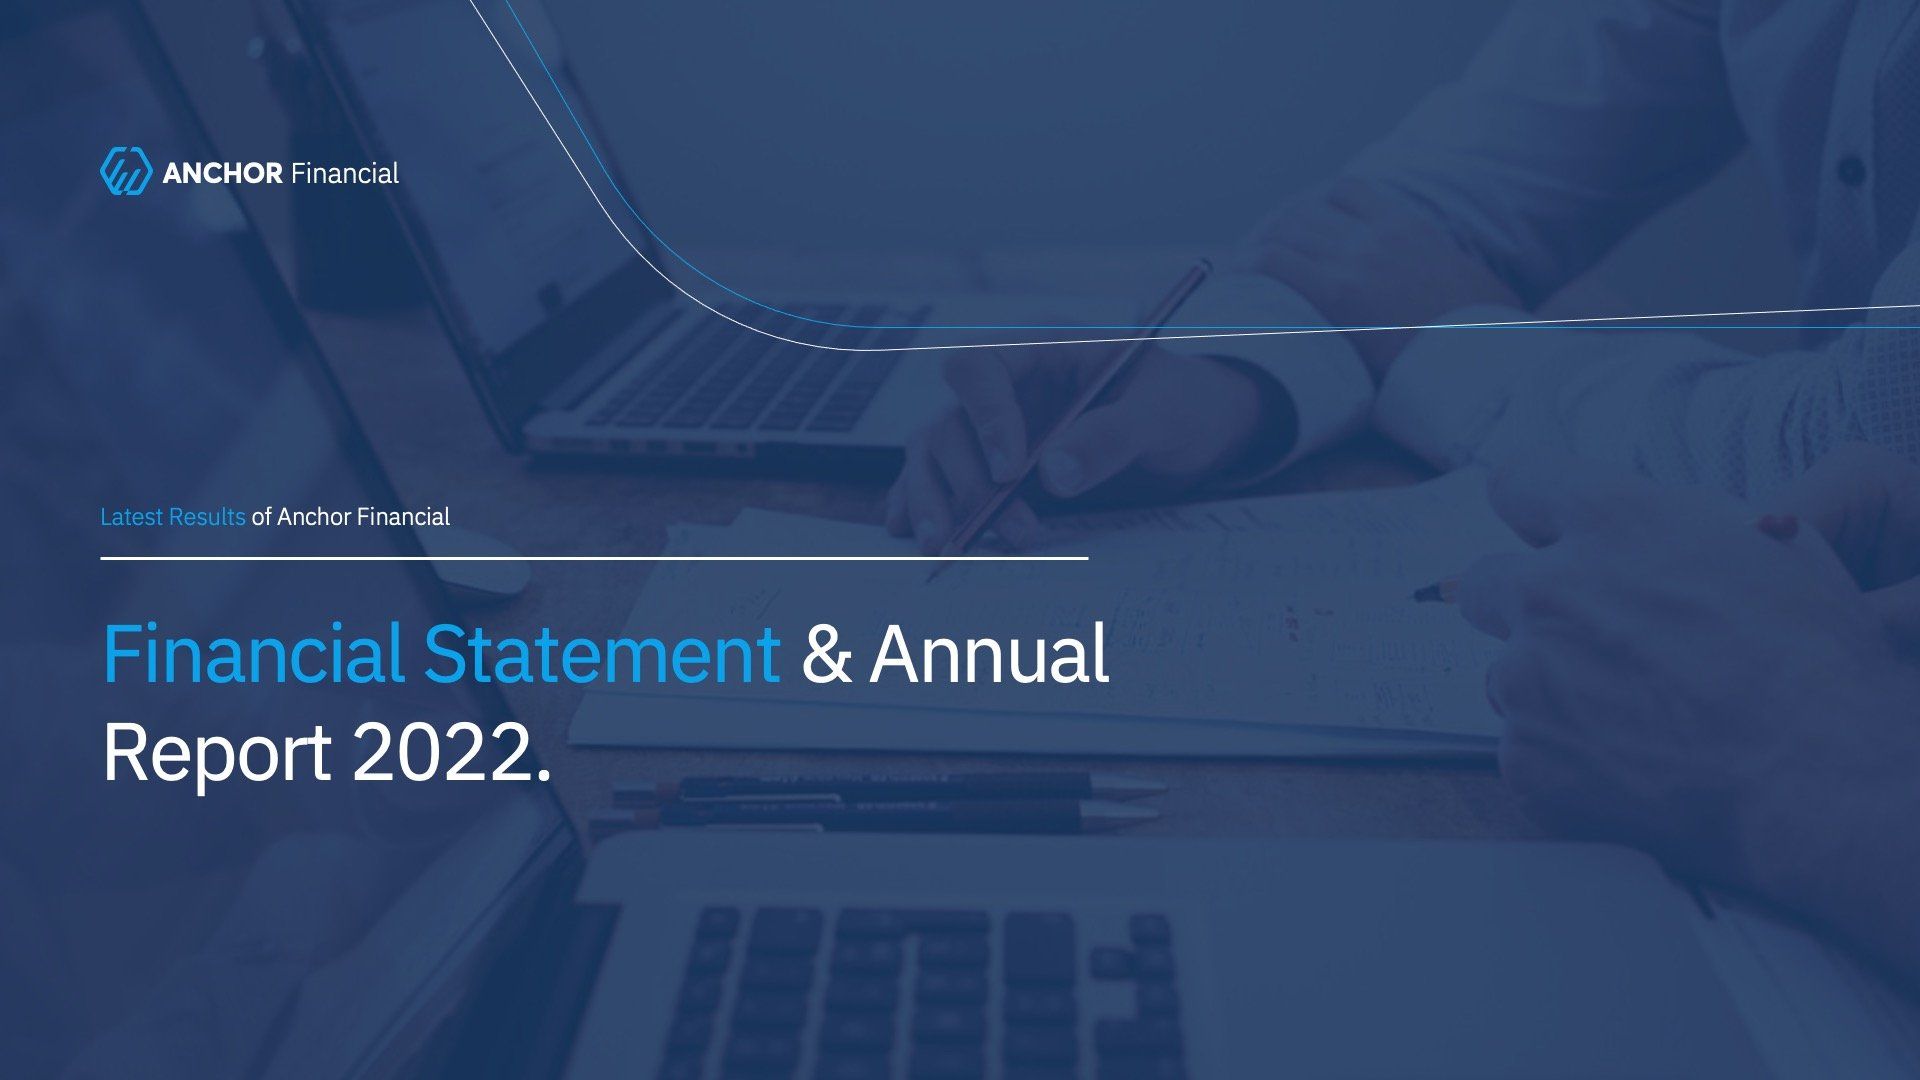 the cover of the financial statement and annual report 2022 shows a person using a laptop computer .